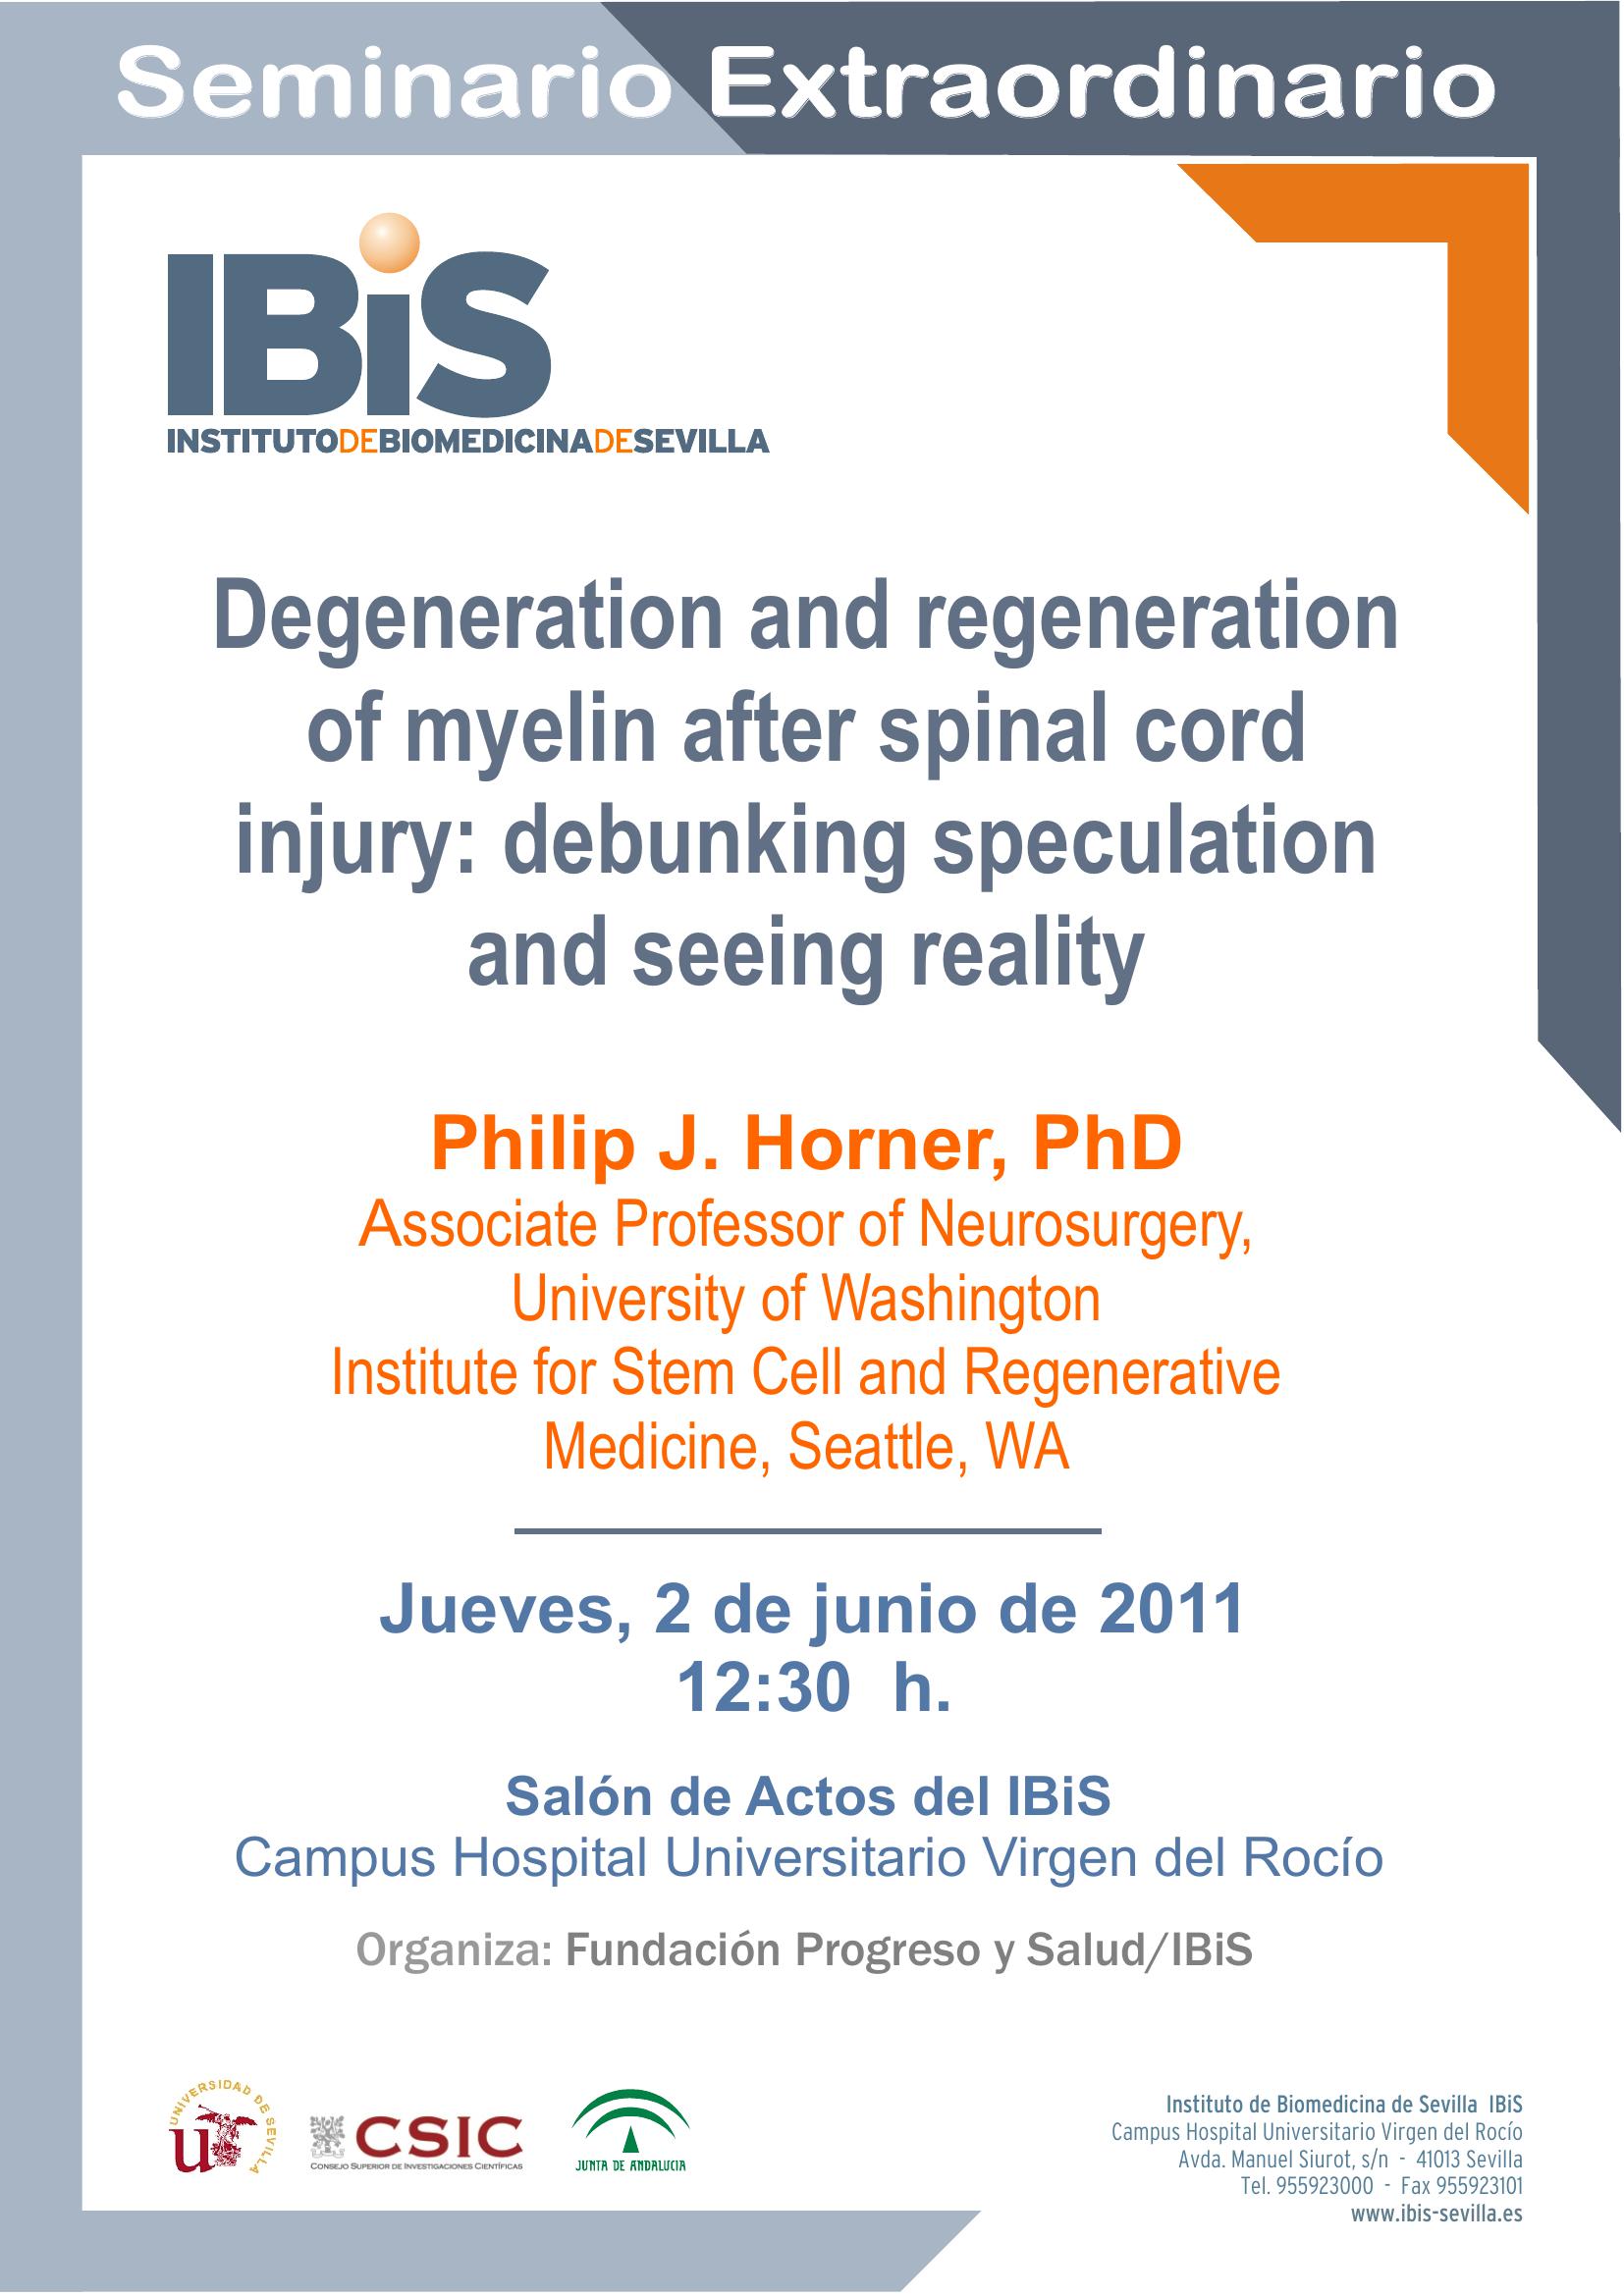 Poster: Degeneration and regeneration of myelin after spinal cord injury: debunking speculation and seeing reality.